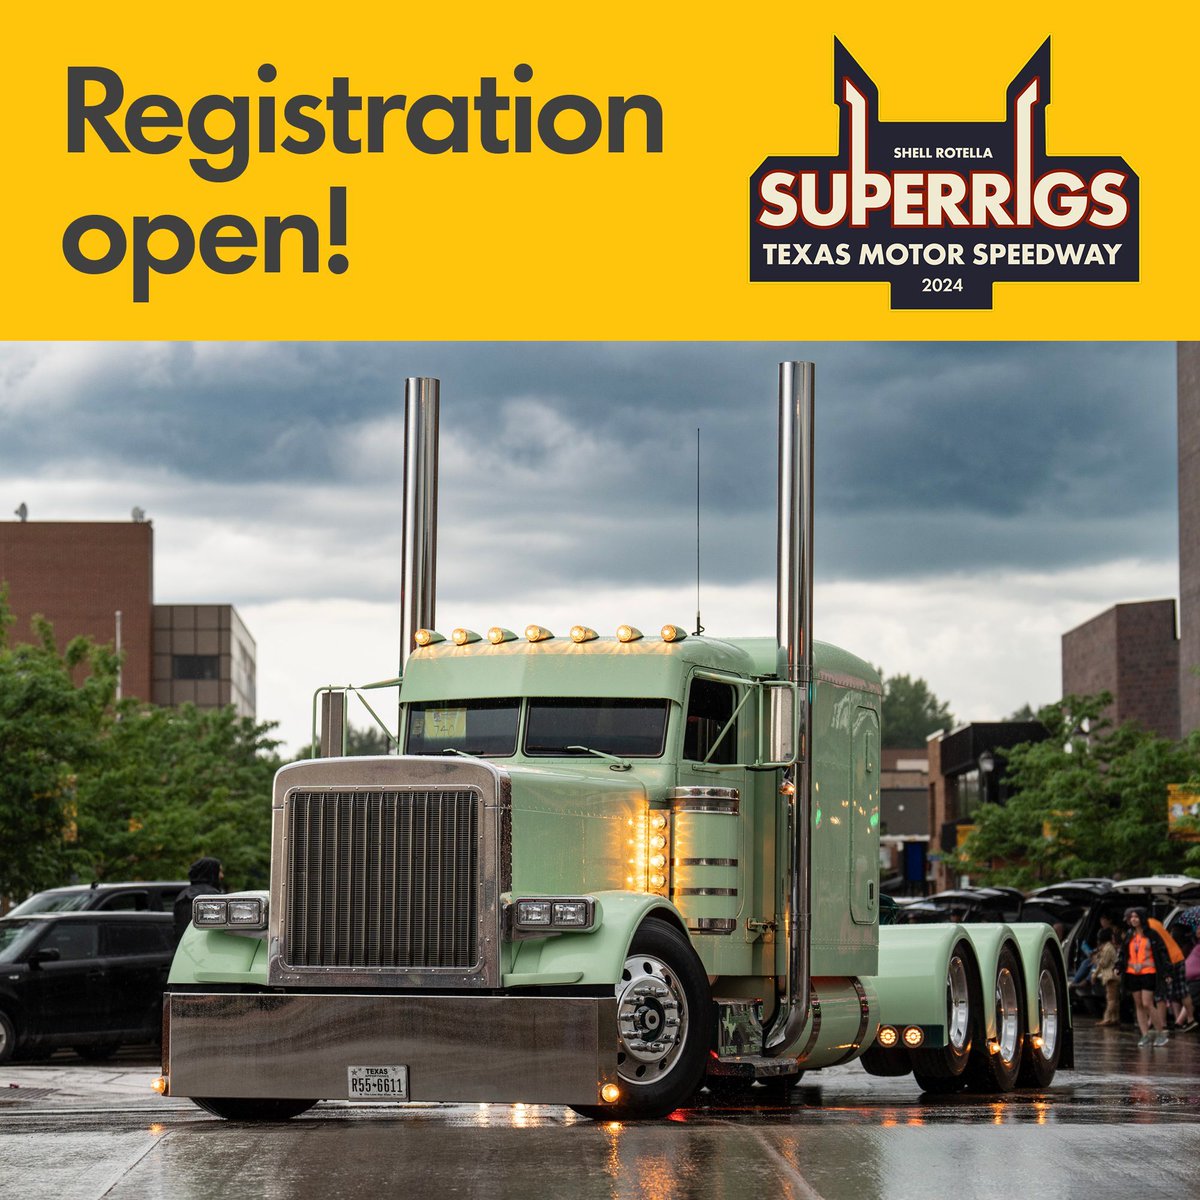 Get ready to show off your big rigs! 2024 @shellrotellat #SuperRigs registration is now open. Join us May 30 - June 1. Register here buff.ly/44eqjZ0.